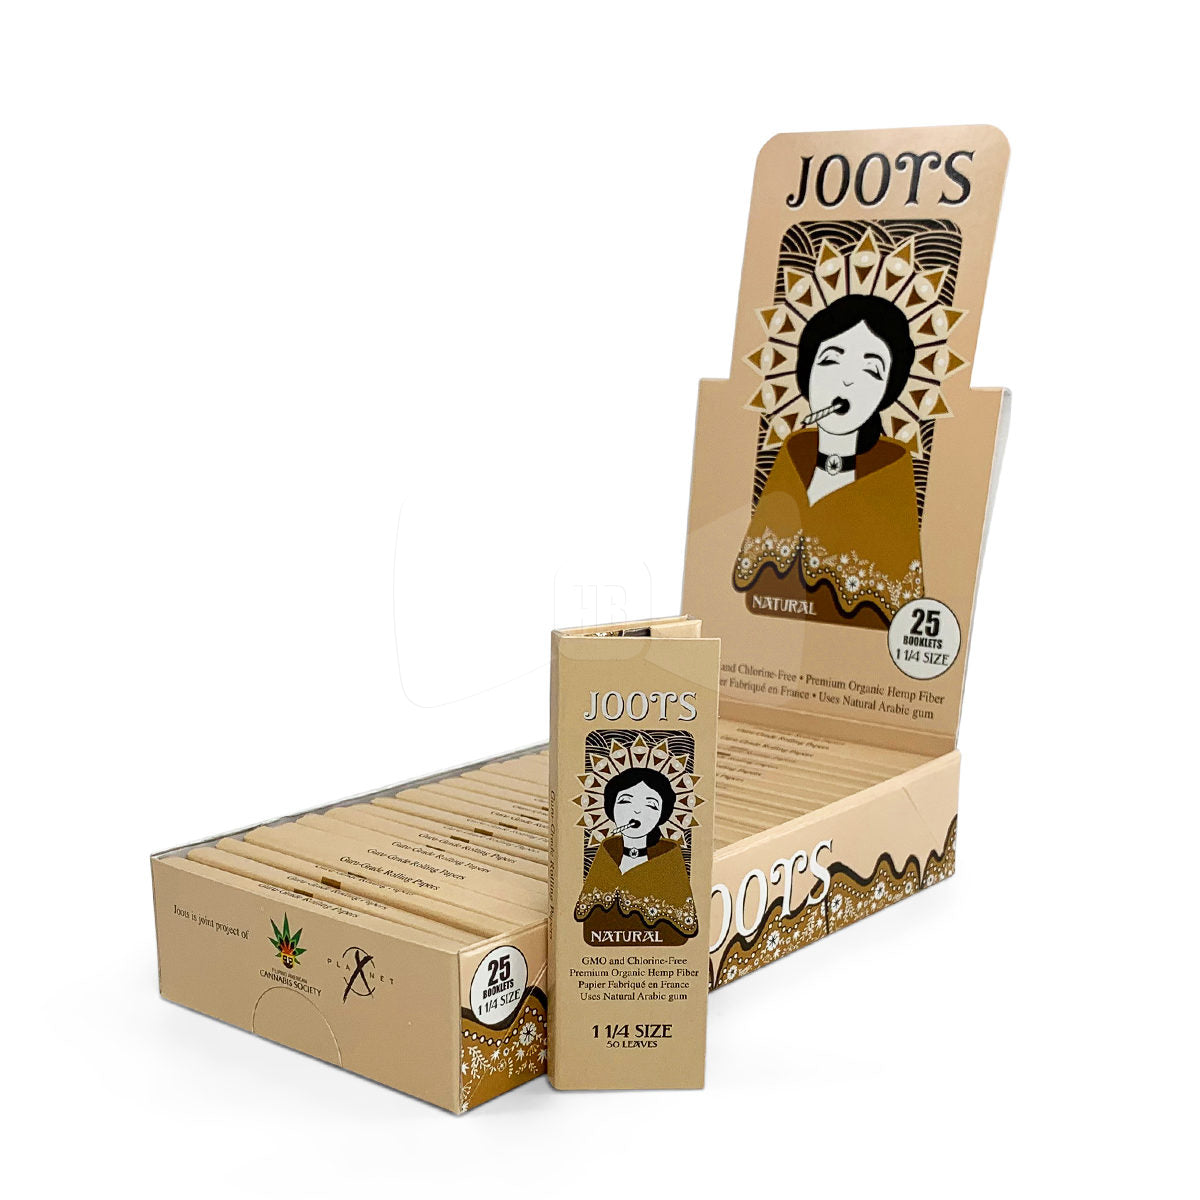 JOOTS NATURAL ROLLING PAPERS 1 1/4 SIZE 25CT